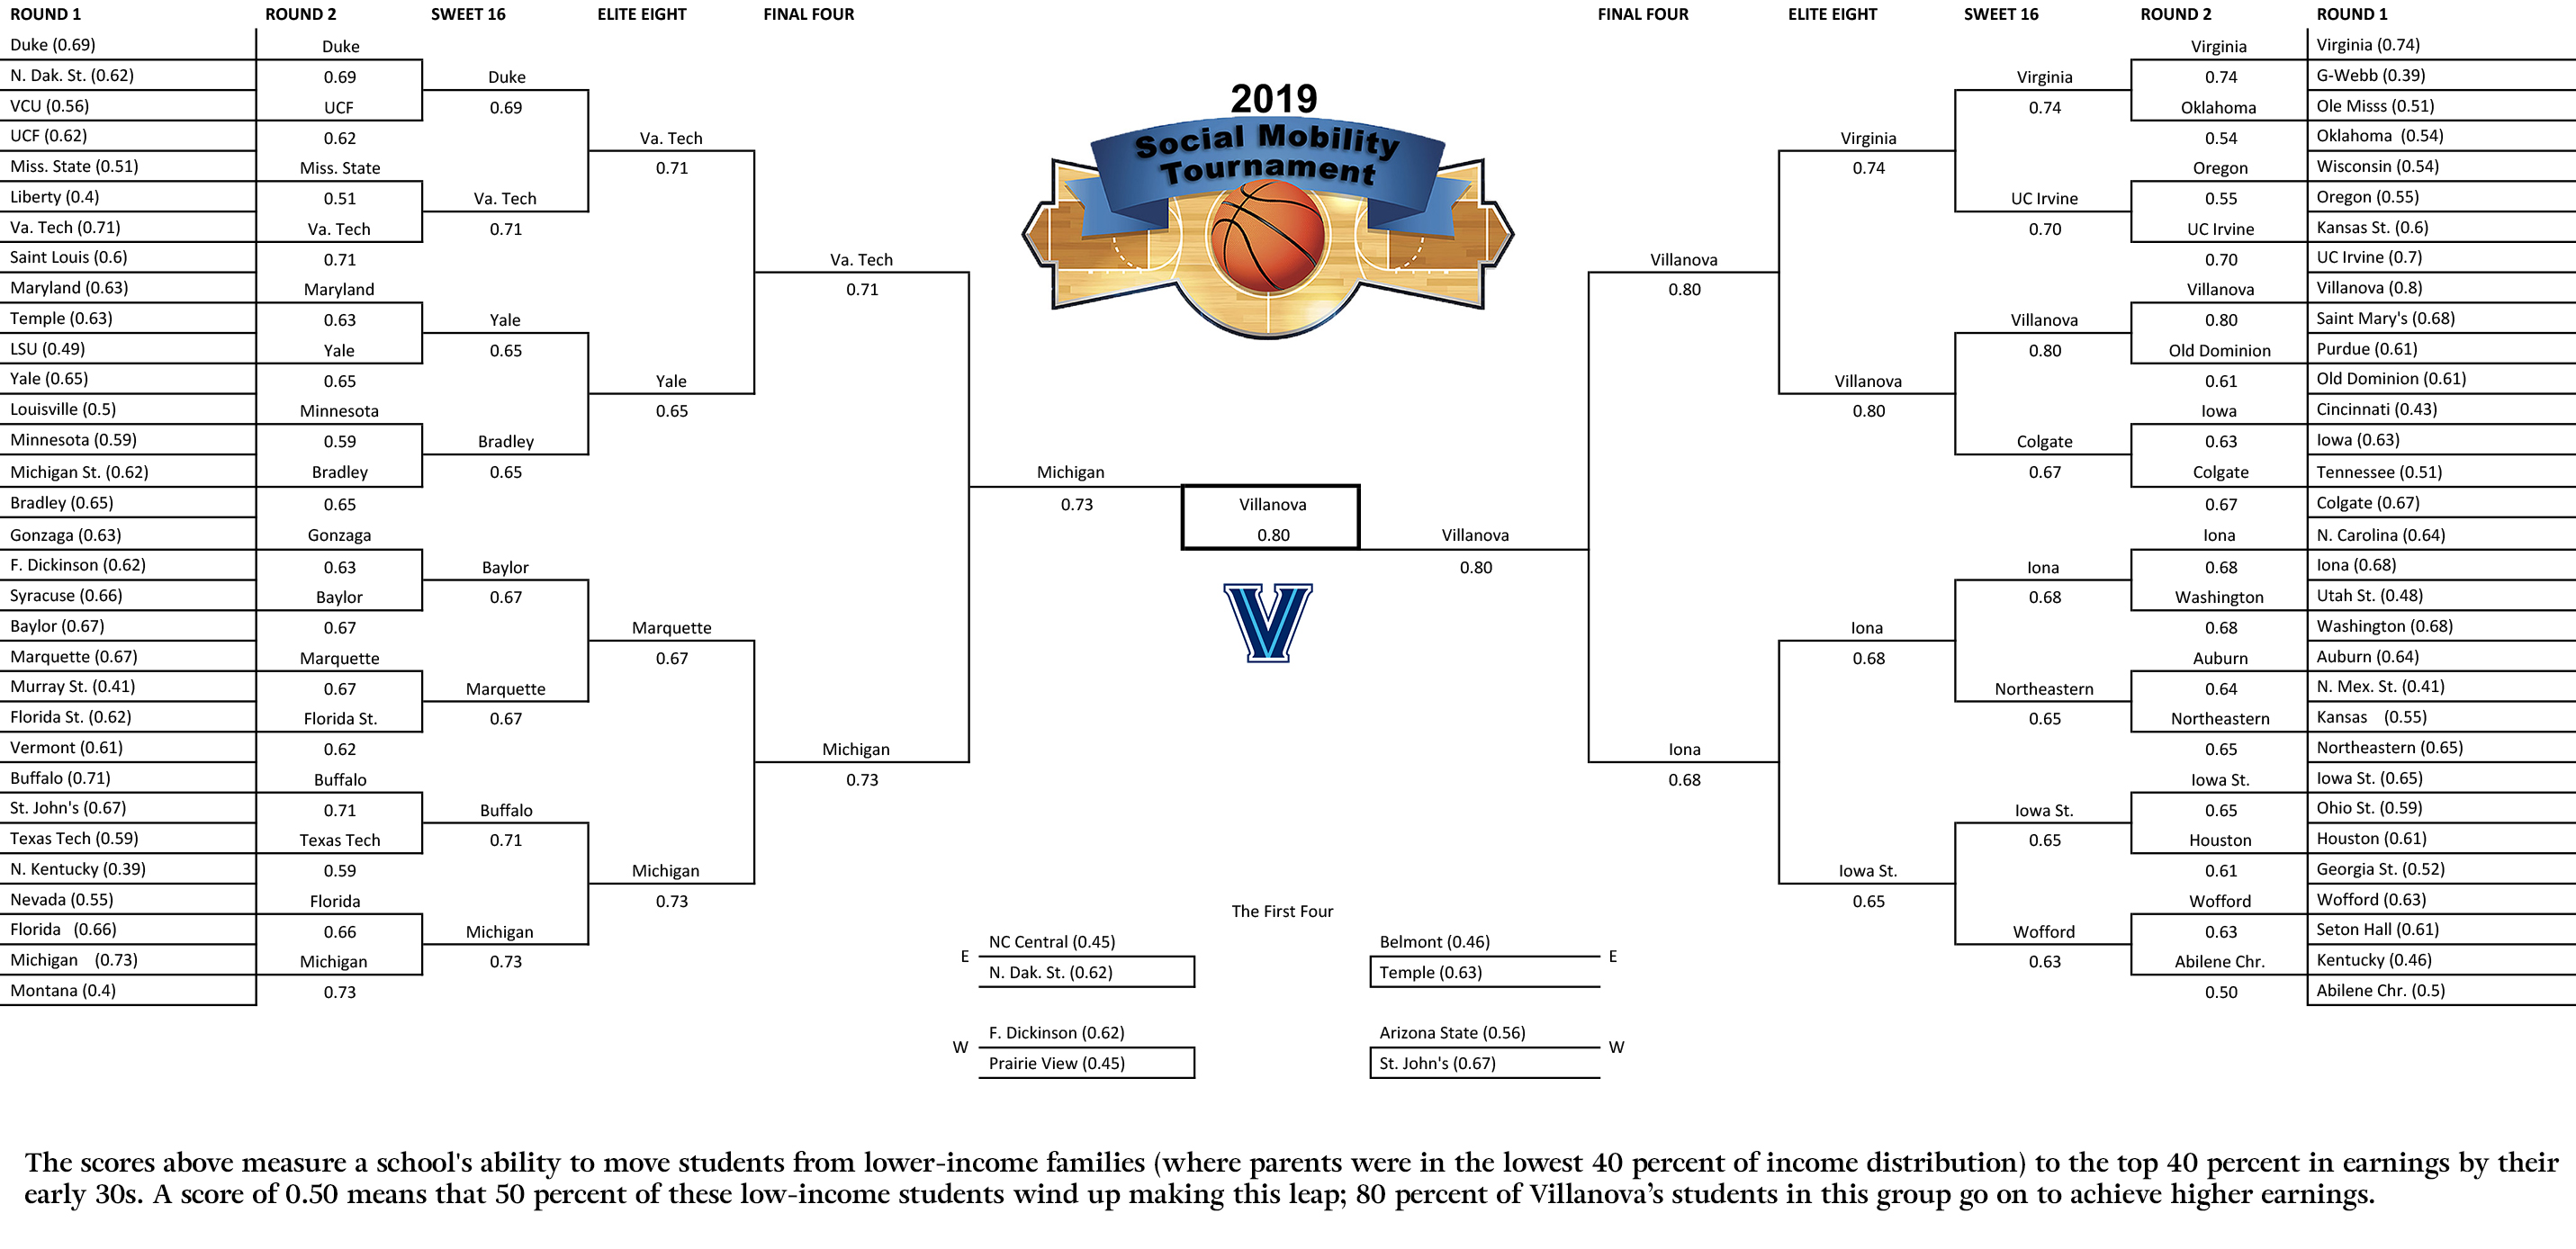 Redrawing NCAA Brackets for Mobility If the 2019 Tournament